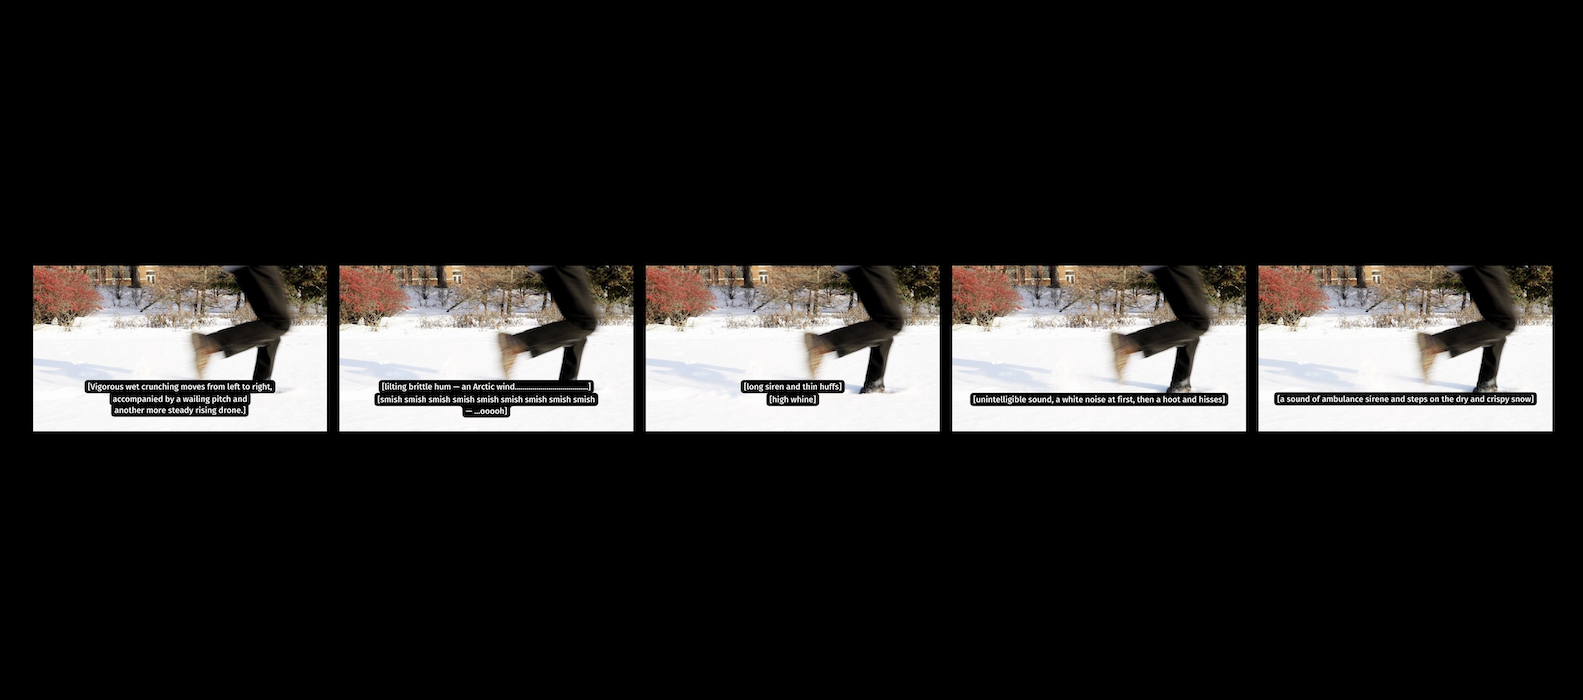 Five monitors showing the same image of someone walking in snow. Each monitor is captioned differently.